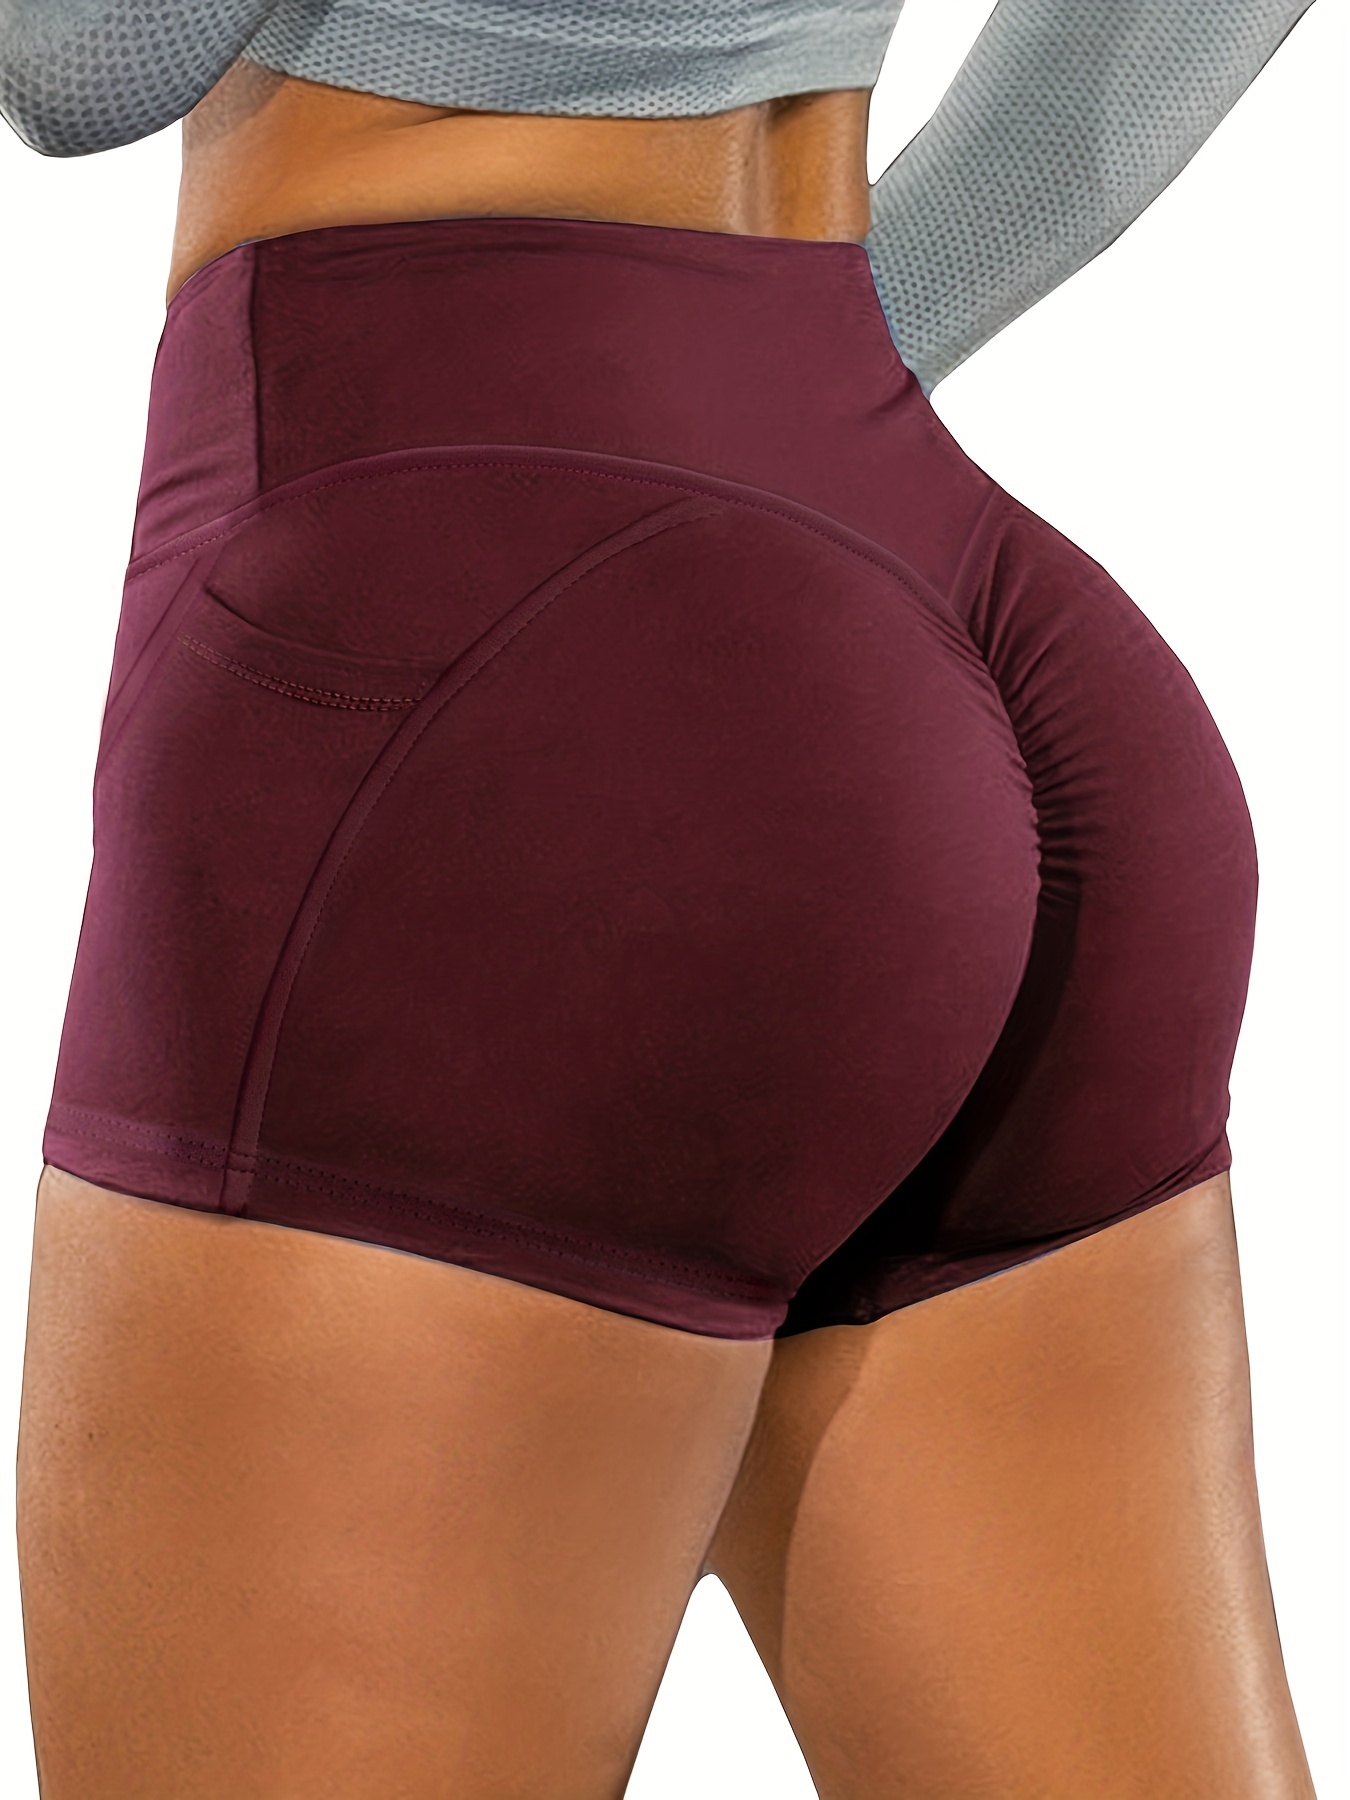 2 PACK Scrunch Bum Shorts With Pockets